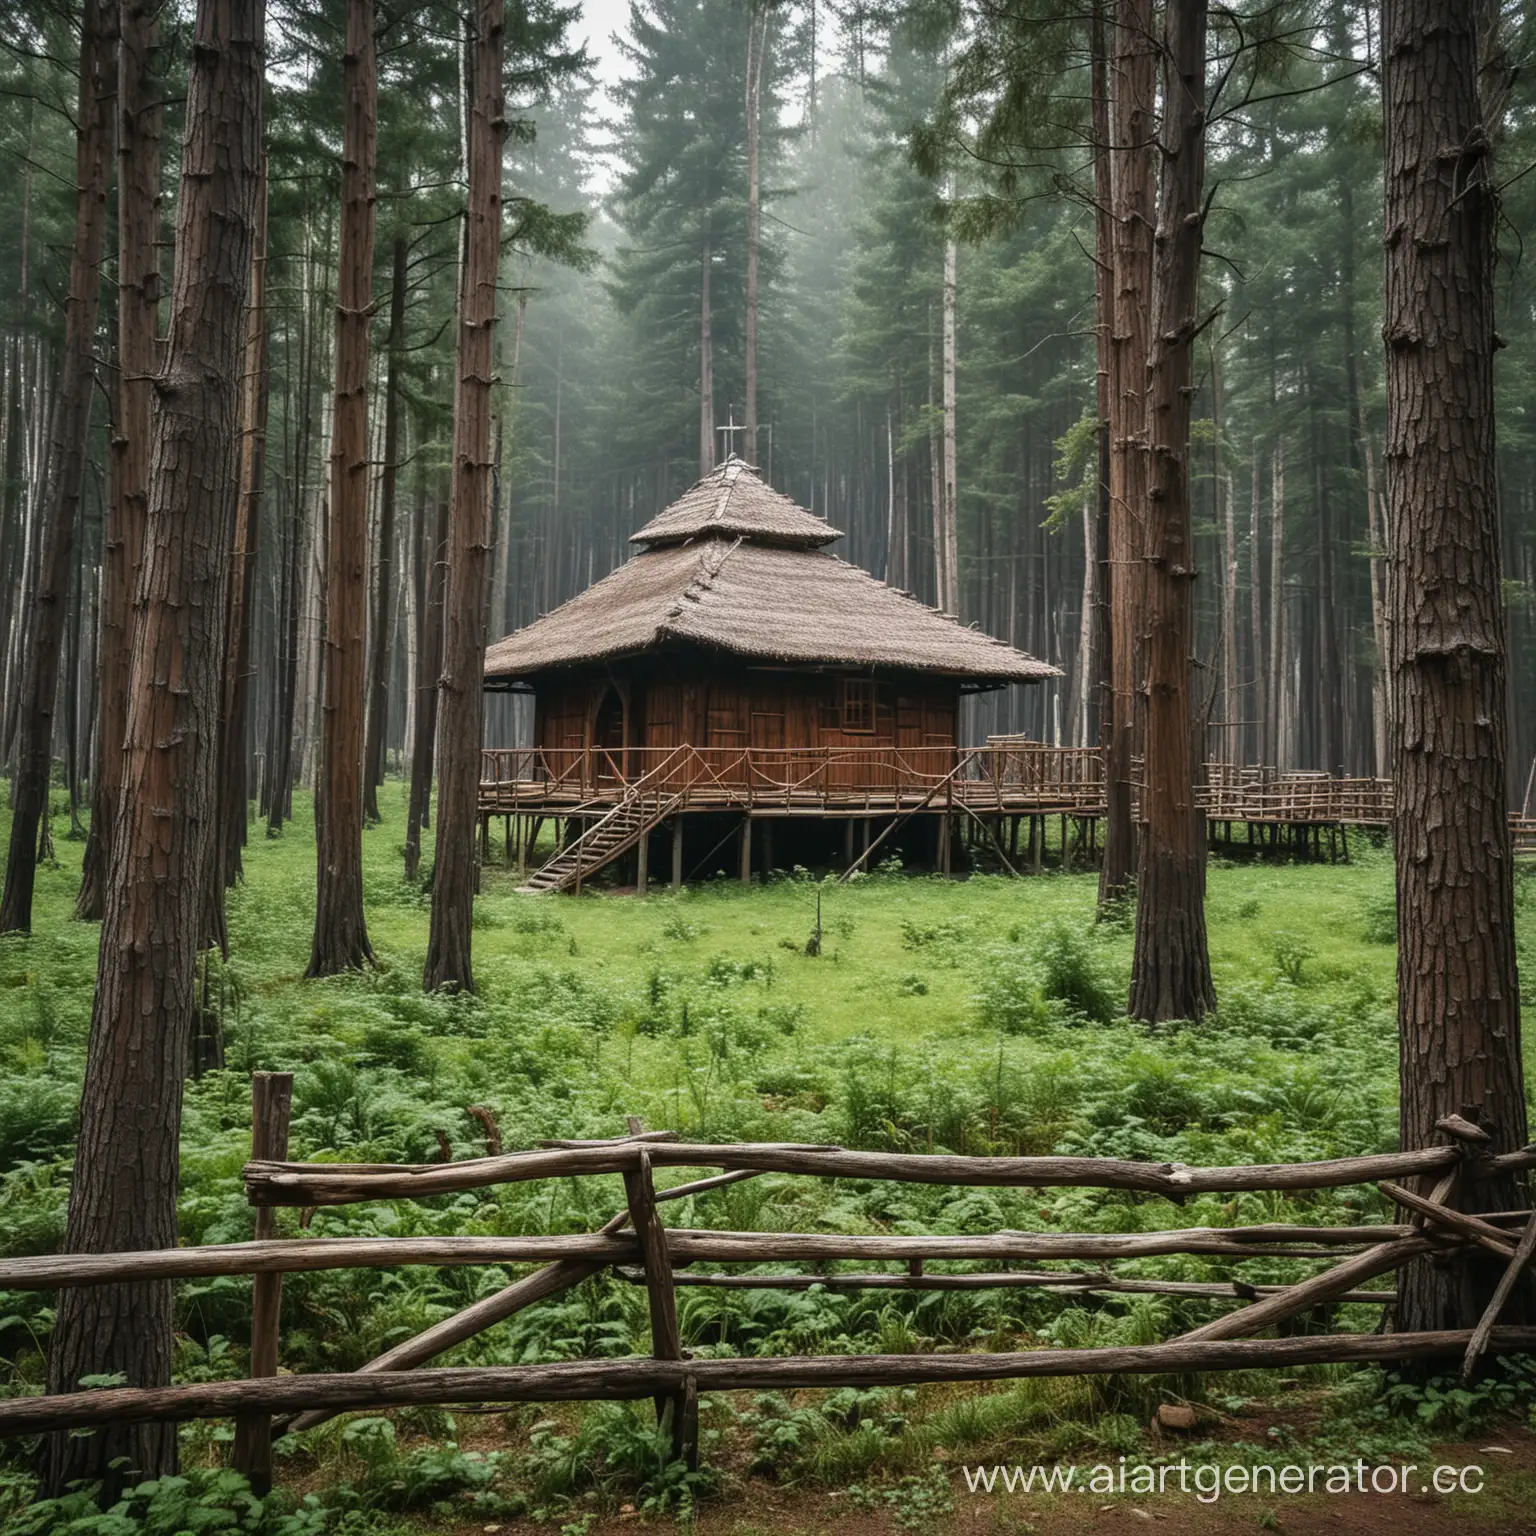 Enchanted-Wooden-Monastery-Hidden-Amidst-Forest-Enclave